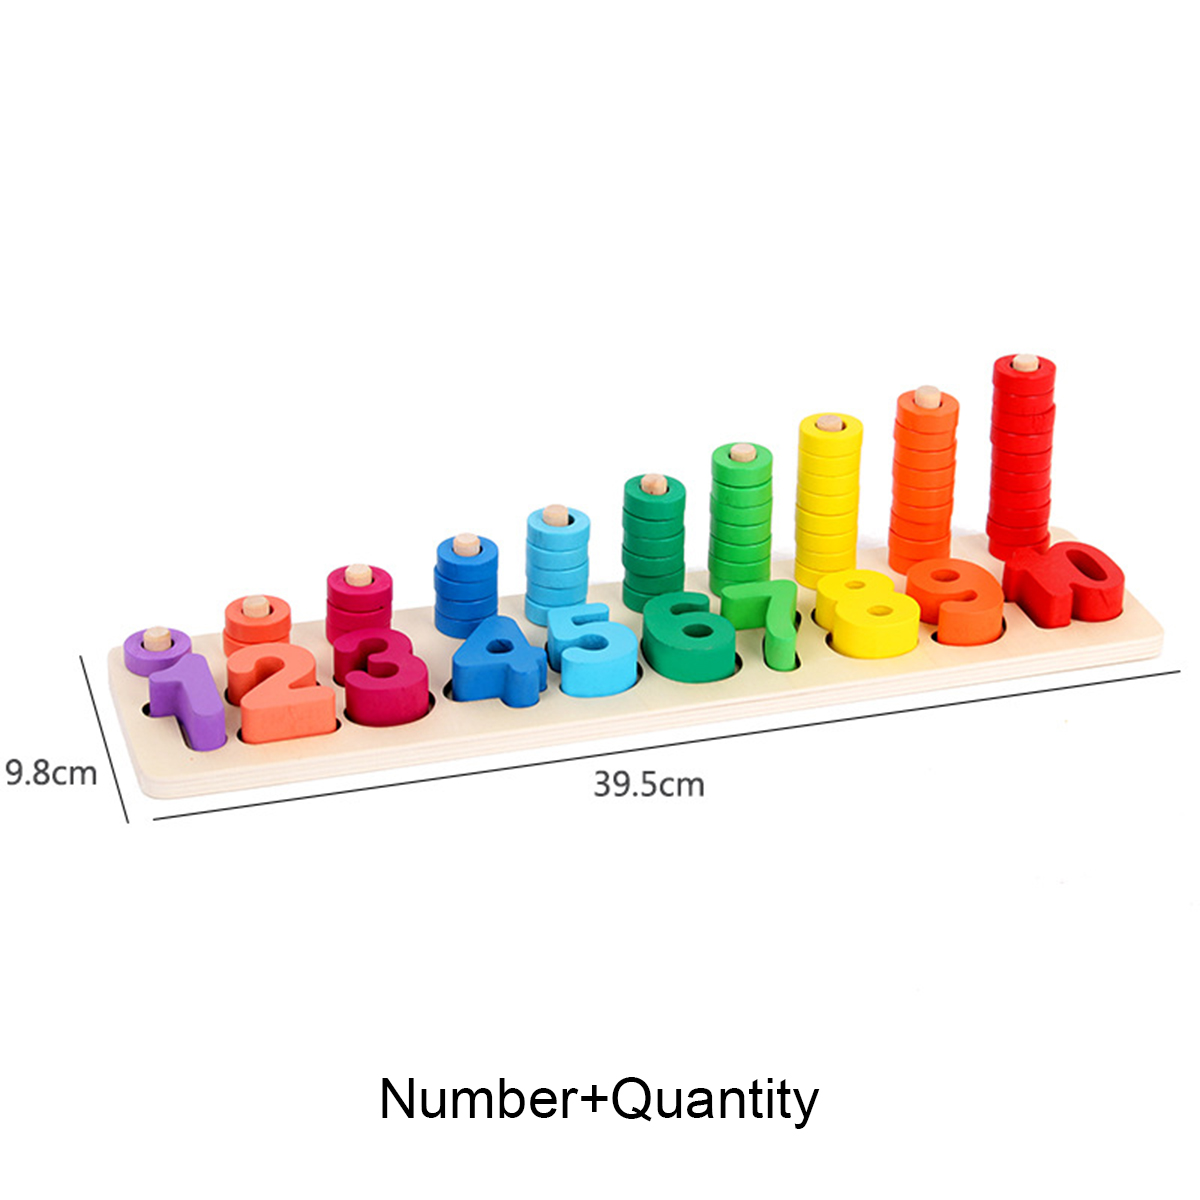 Children-Wooden-Montessori-Materials-Learning-To-Count-Numbers-Matching-Digital-Shape-Match-Early-Ed-1605437-6